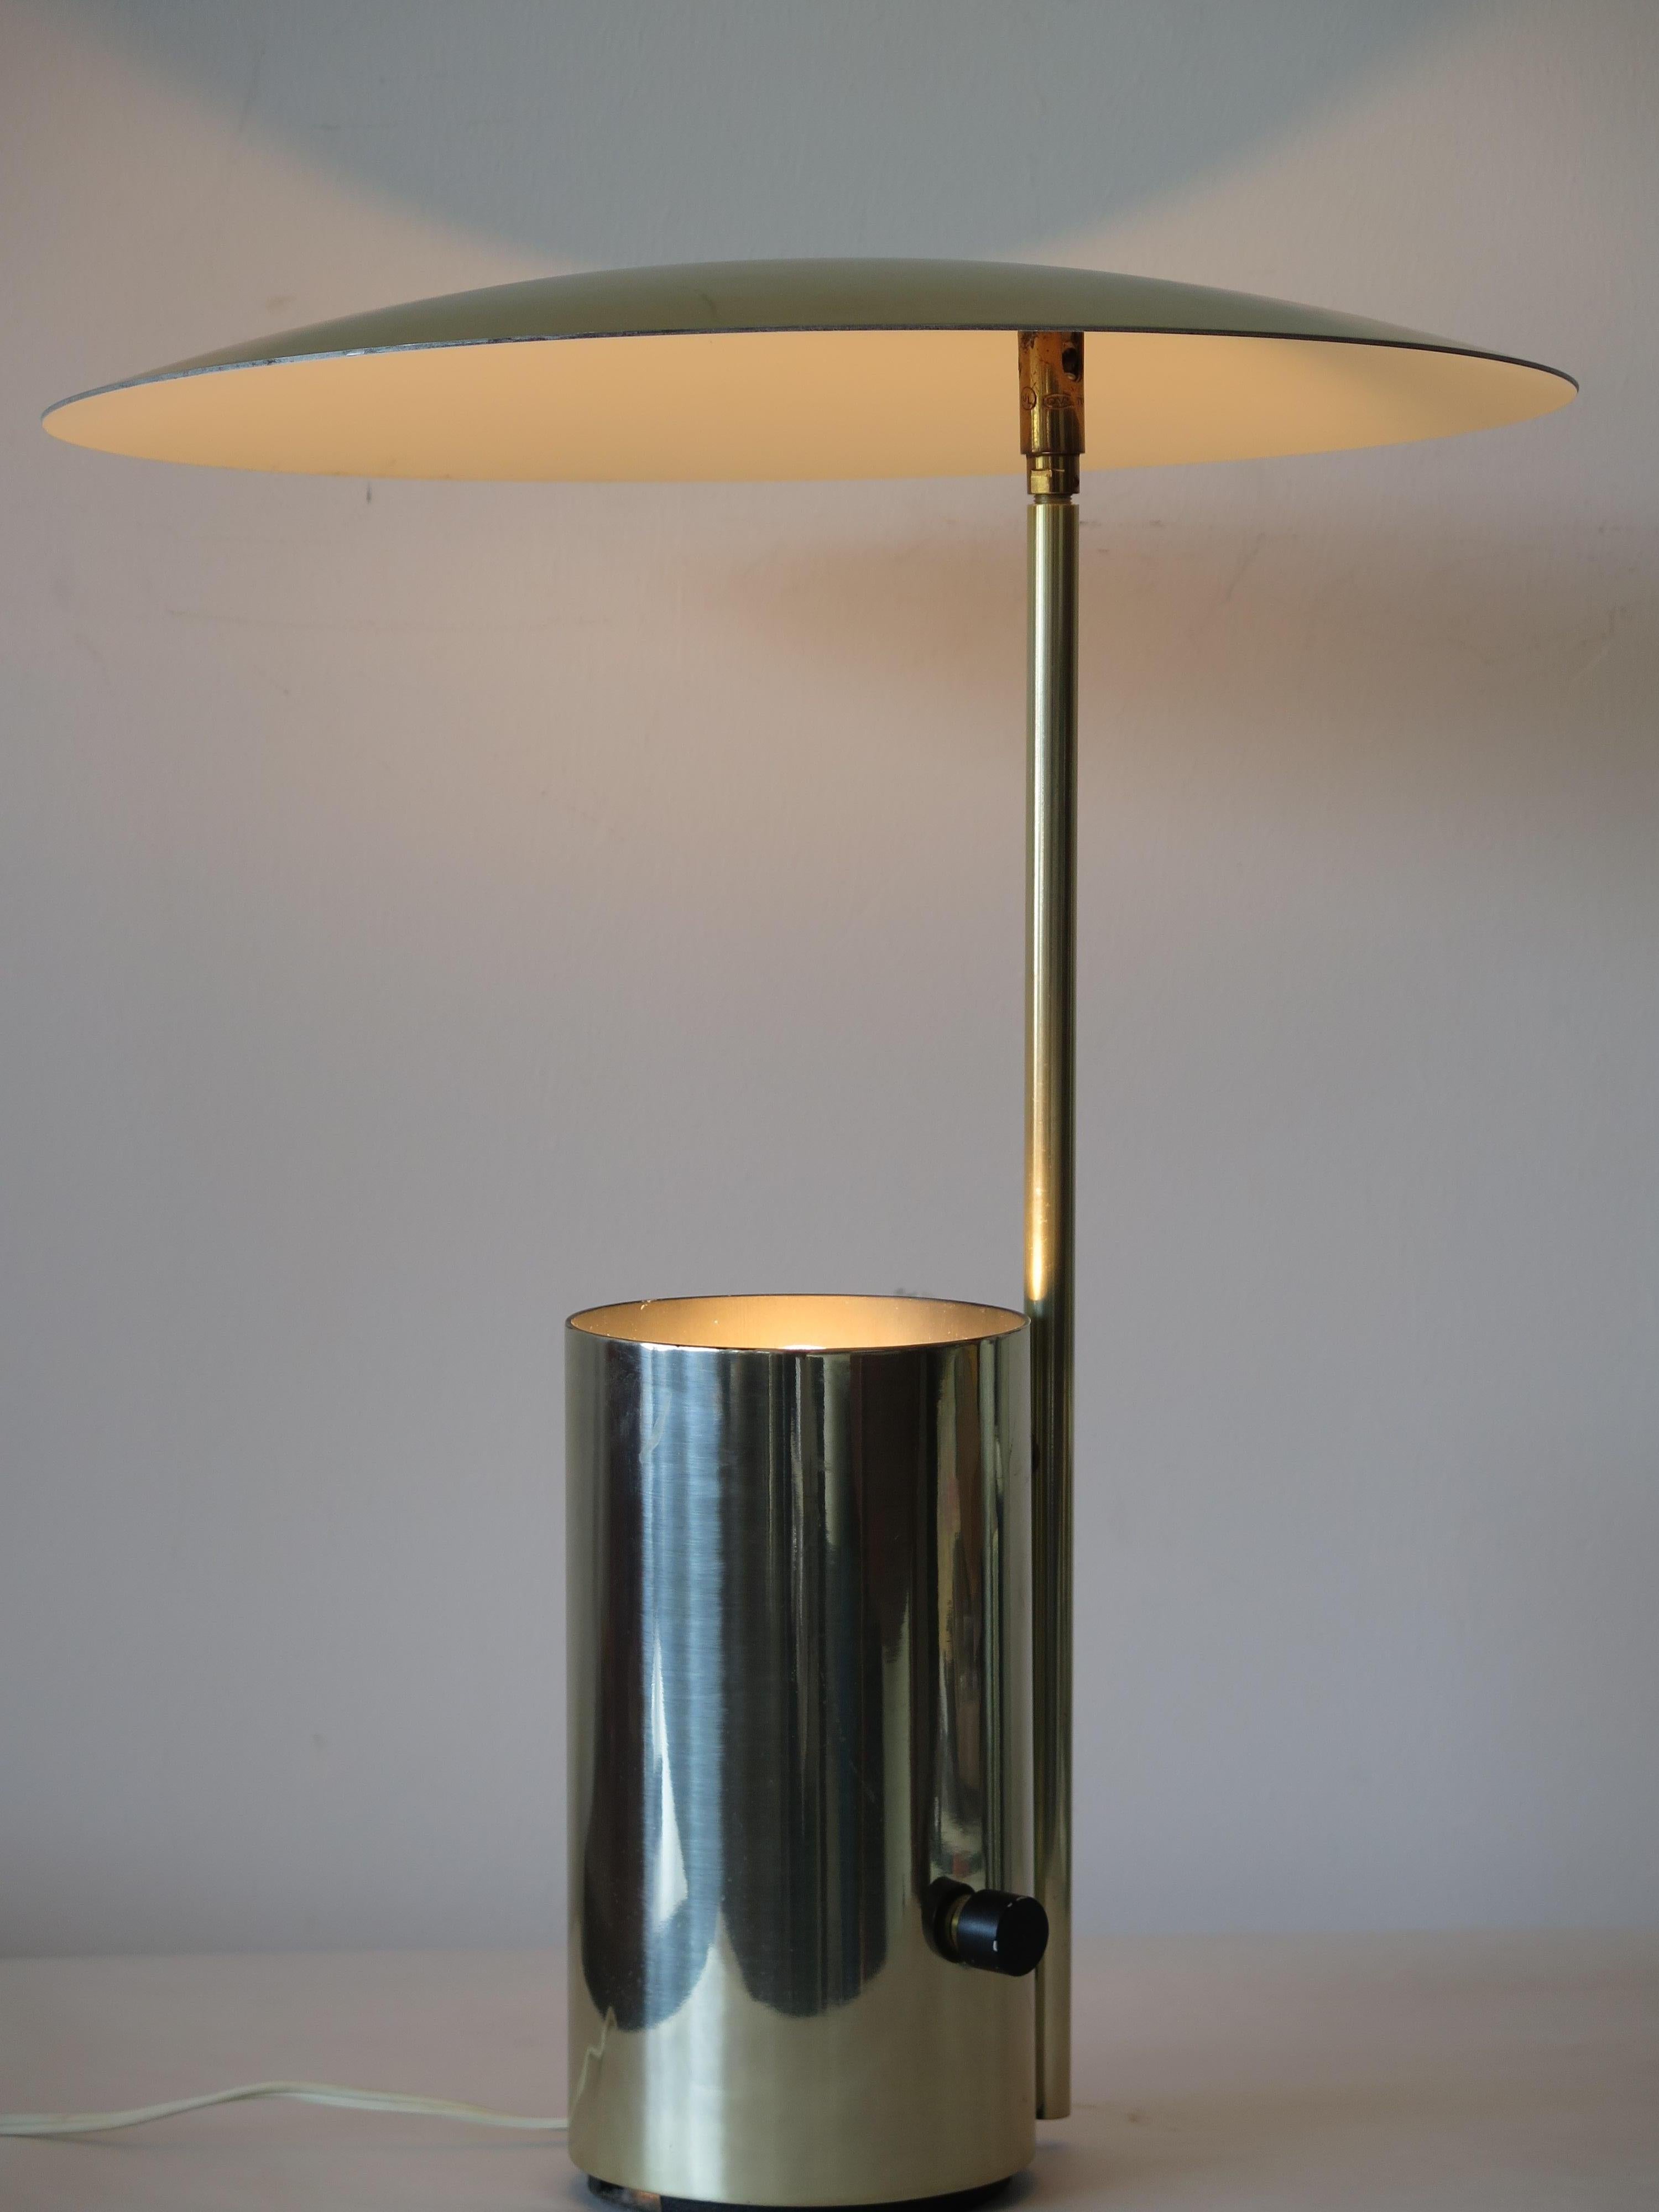 Mid-20th Century George Nelson Half Lamp for Koch Lowy